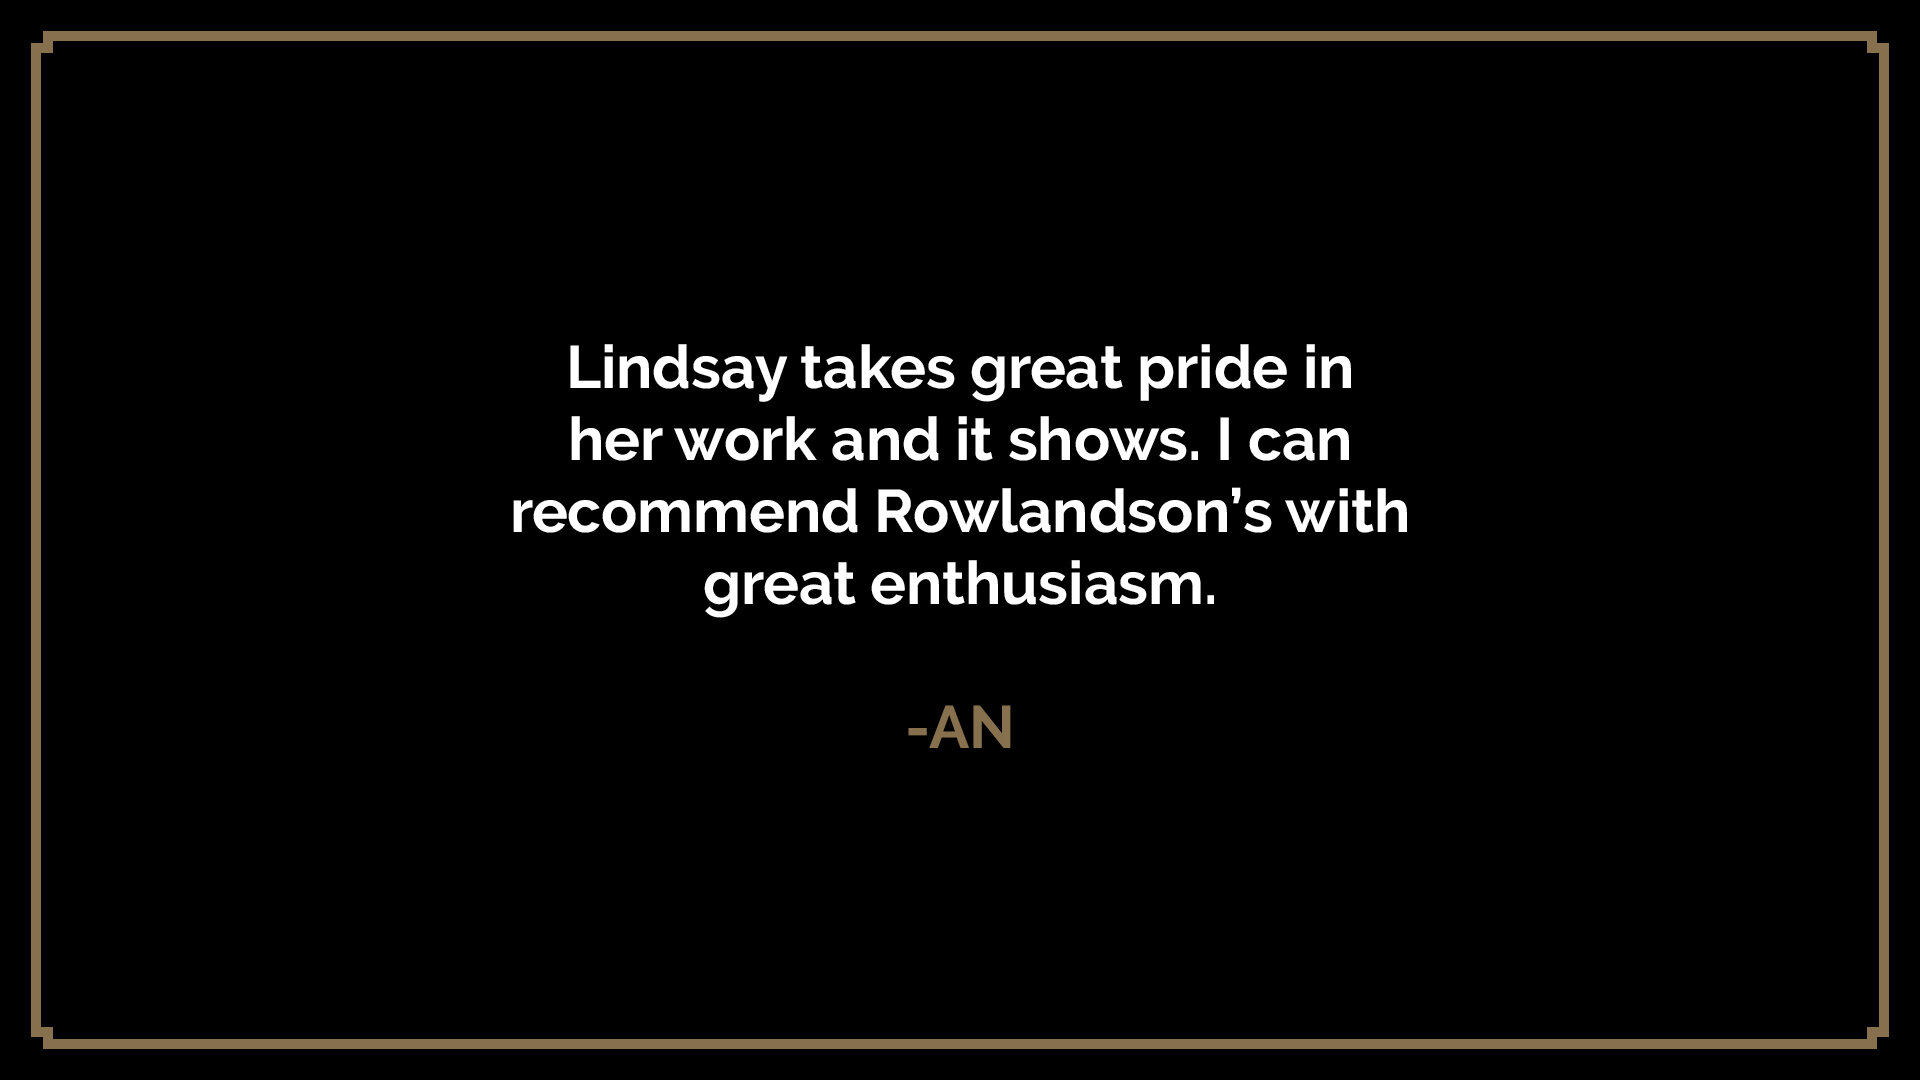  Lindsay takes great pride in her work and it shows. I can recommend Rowlandson’s with great enthusiasm.  -AN 